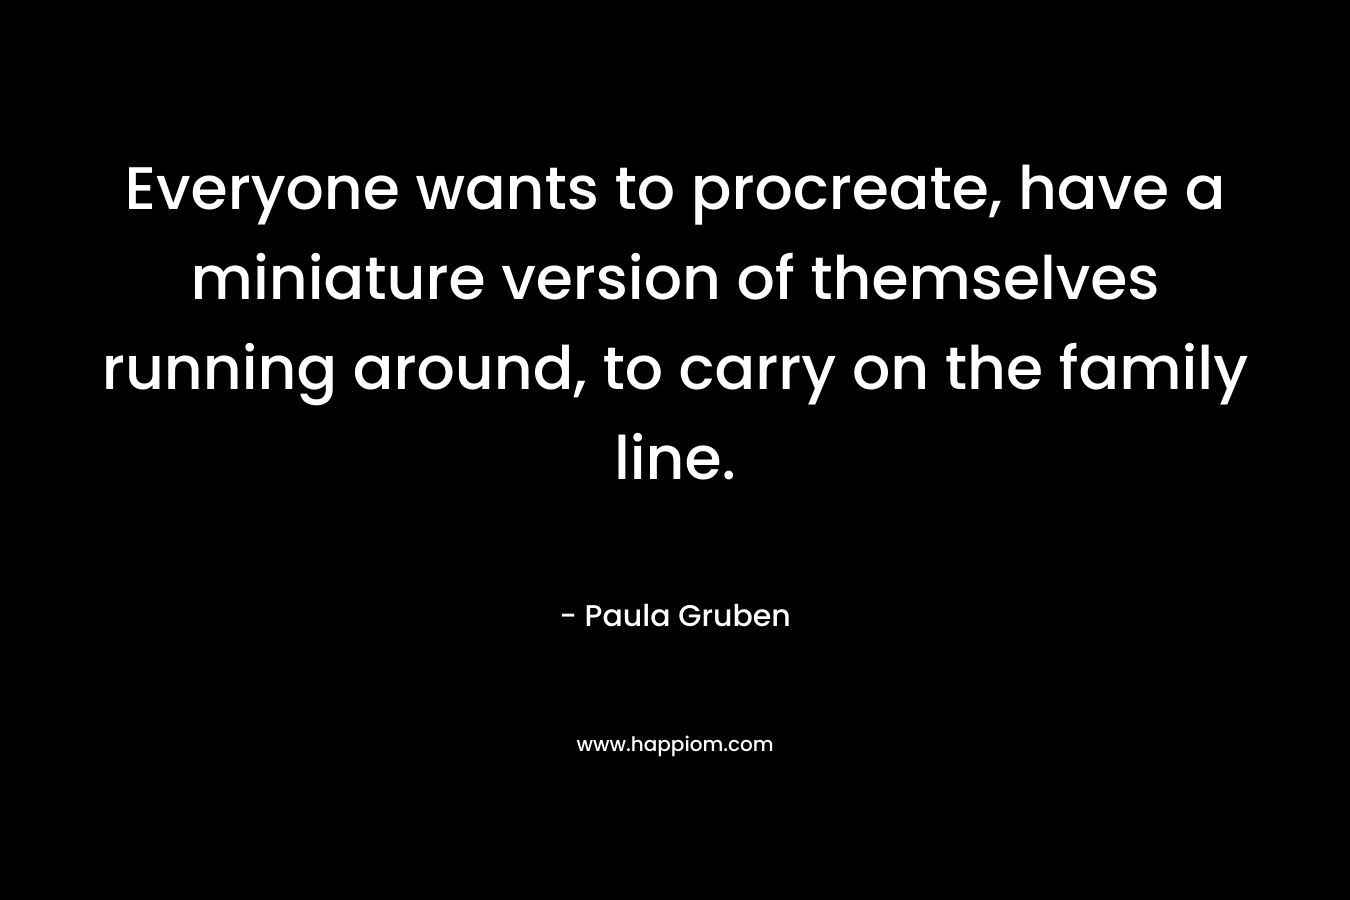 Everyone wants to procreate, have a miniature version of themselves running around, to carry on the family line. – Paula Gruben